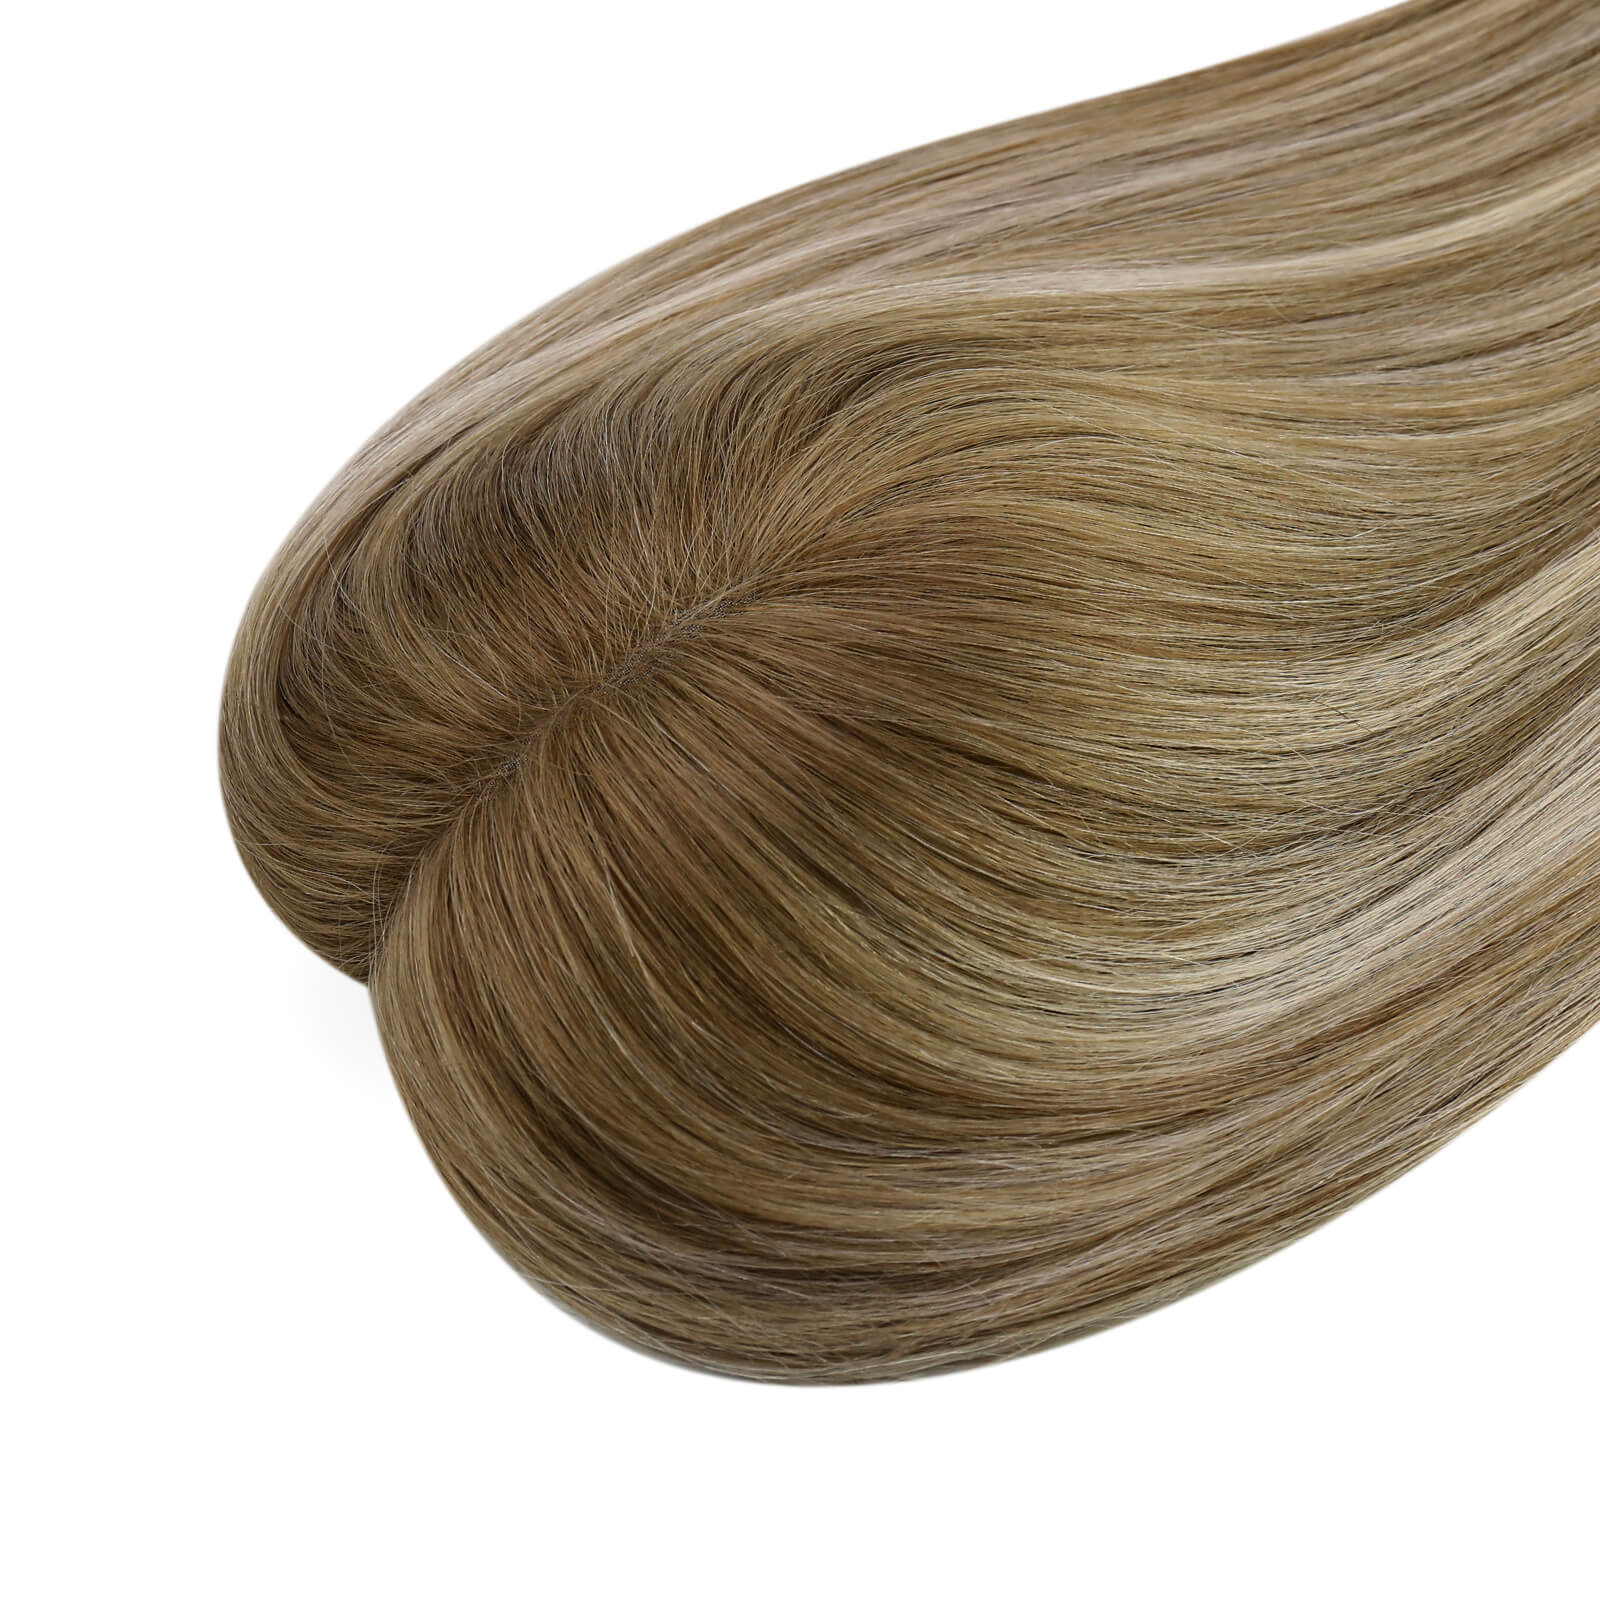 human hair topper,high quality virgin hair extensions,hair topper women,hair topper wig,hair topper silk base,hair topper human hair,hair topper for women,hair topper for thinning crown,hair topper,clip on hair topper,Best Hair Topper with Clips,silk base hair topper,best hair topper,silk hair topper,blonde highlight,brown highlight,distribute seams at will,invisible topper,large base topper,large base 6*7 inch